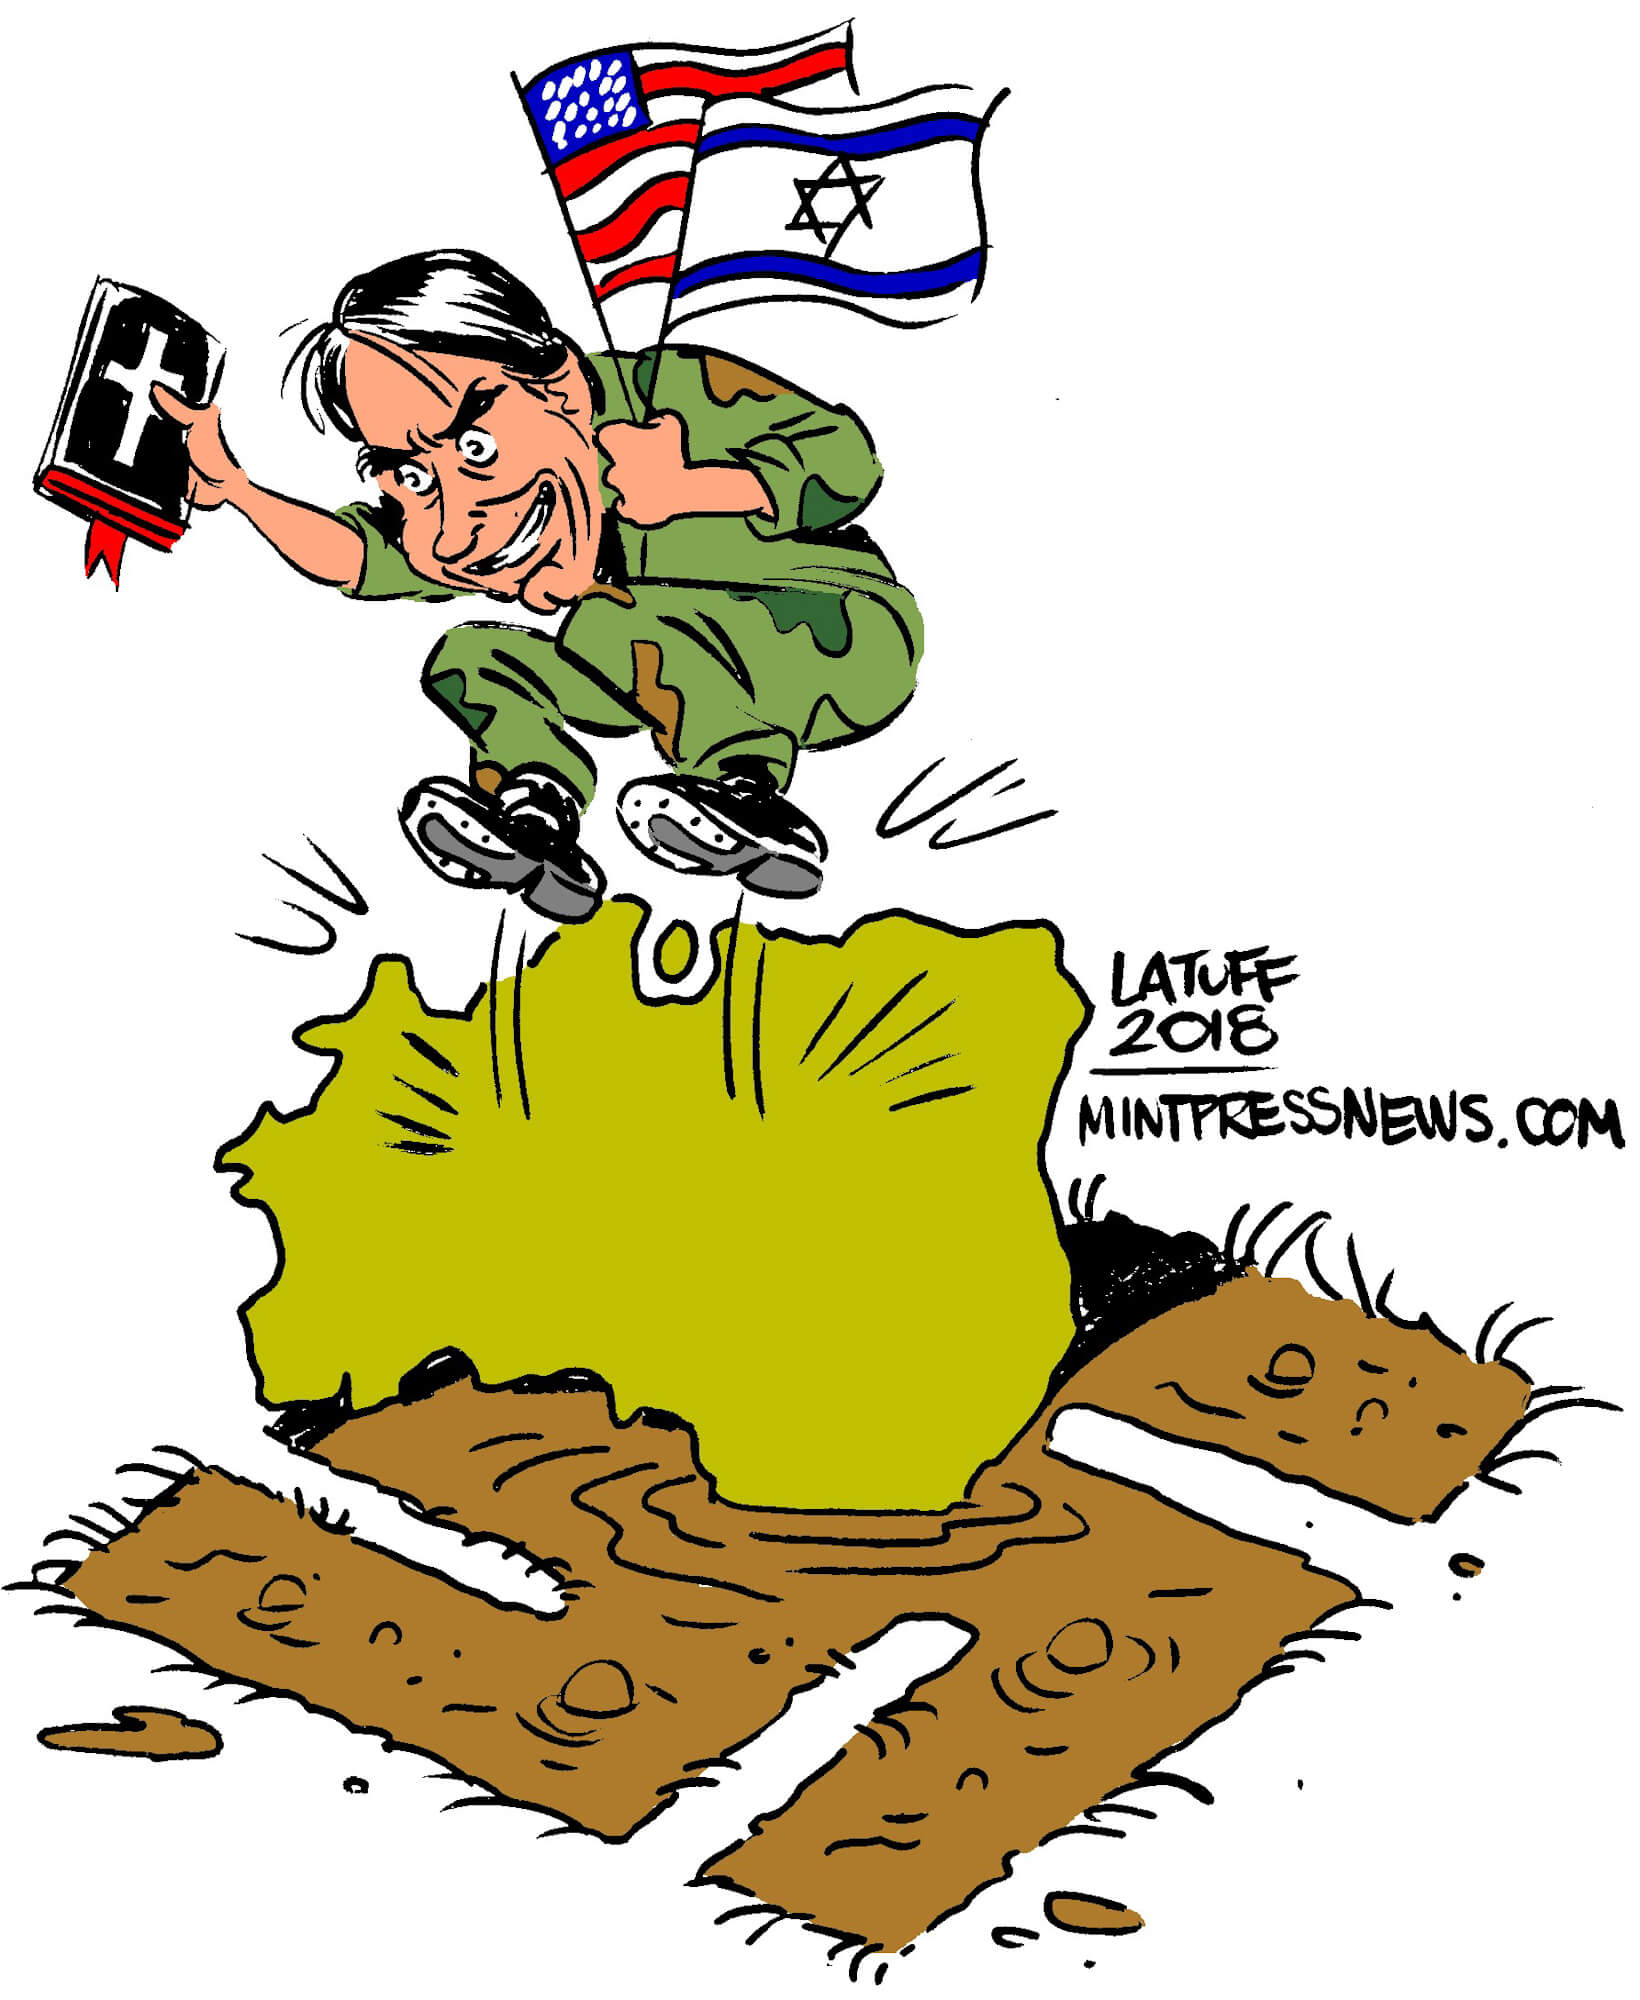 Brazil, backed by the United States and Israel, elects far-right president Bolsonaro. An Editorial Cartoon by Carlos Latuff for MintPress News.